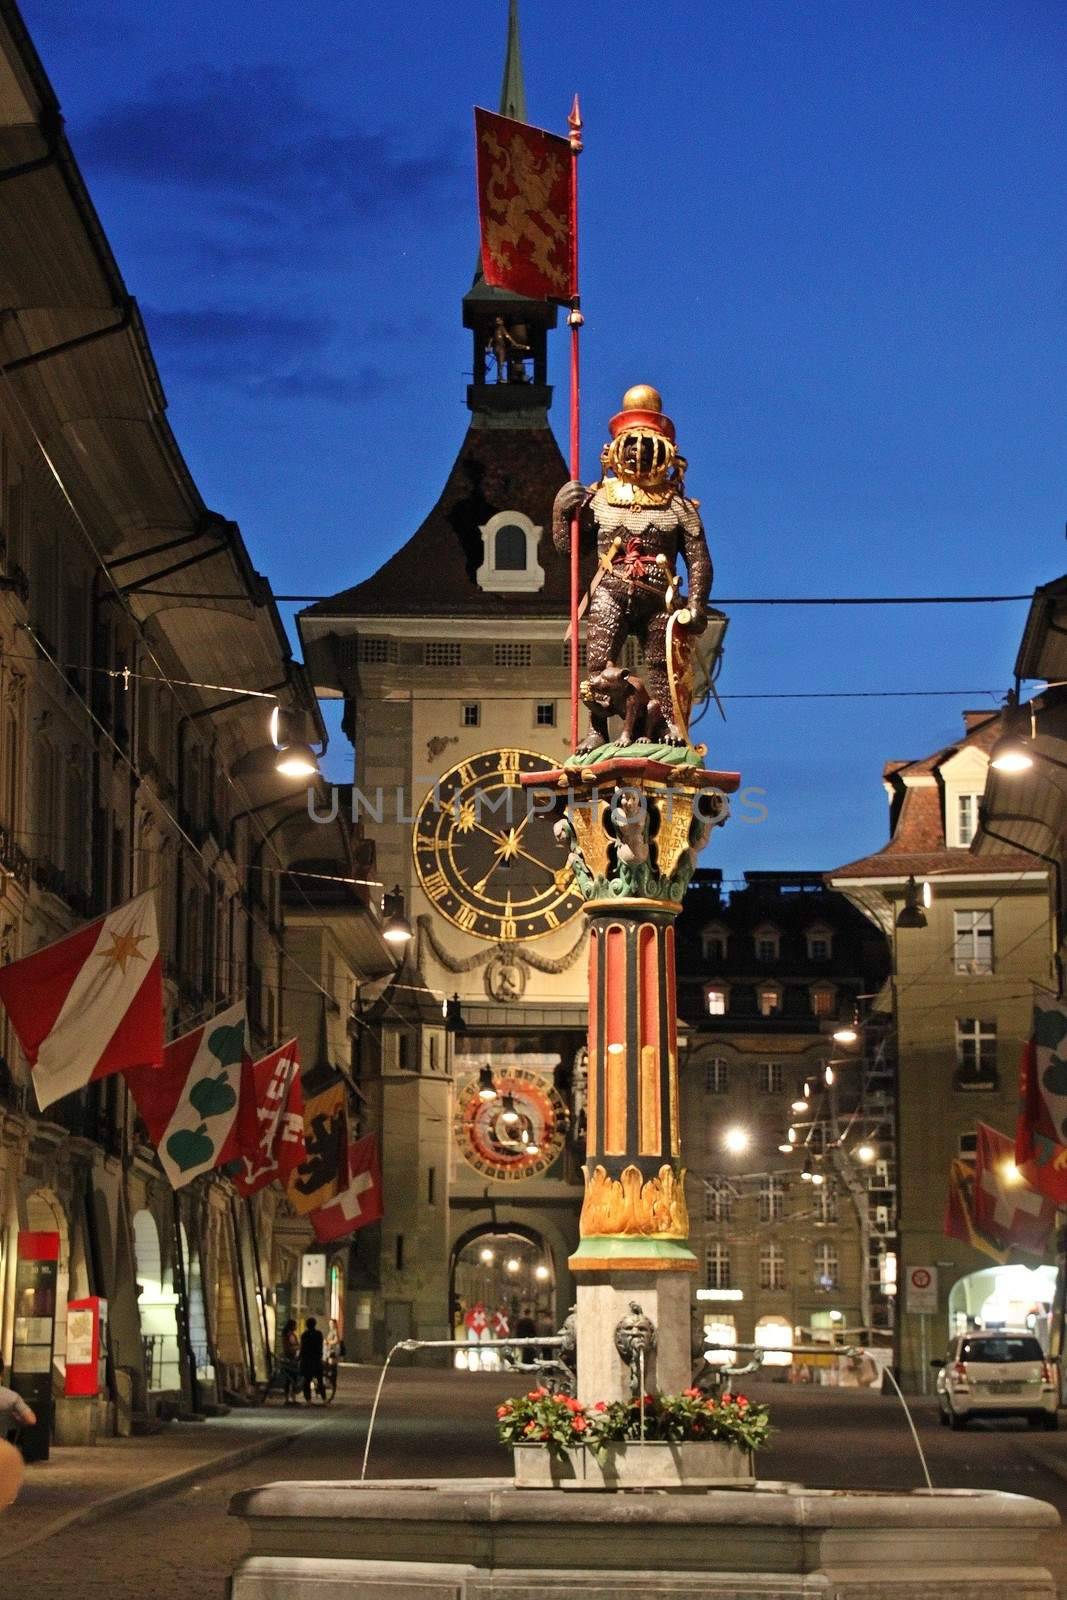 The historic picturesque centre of Berne, Switzerland with the town clock tower at dusk